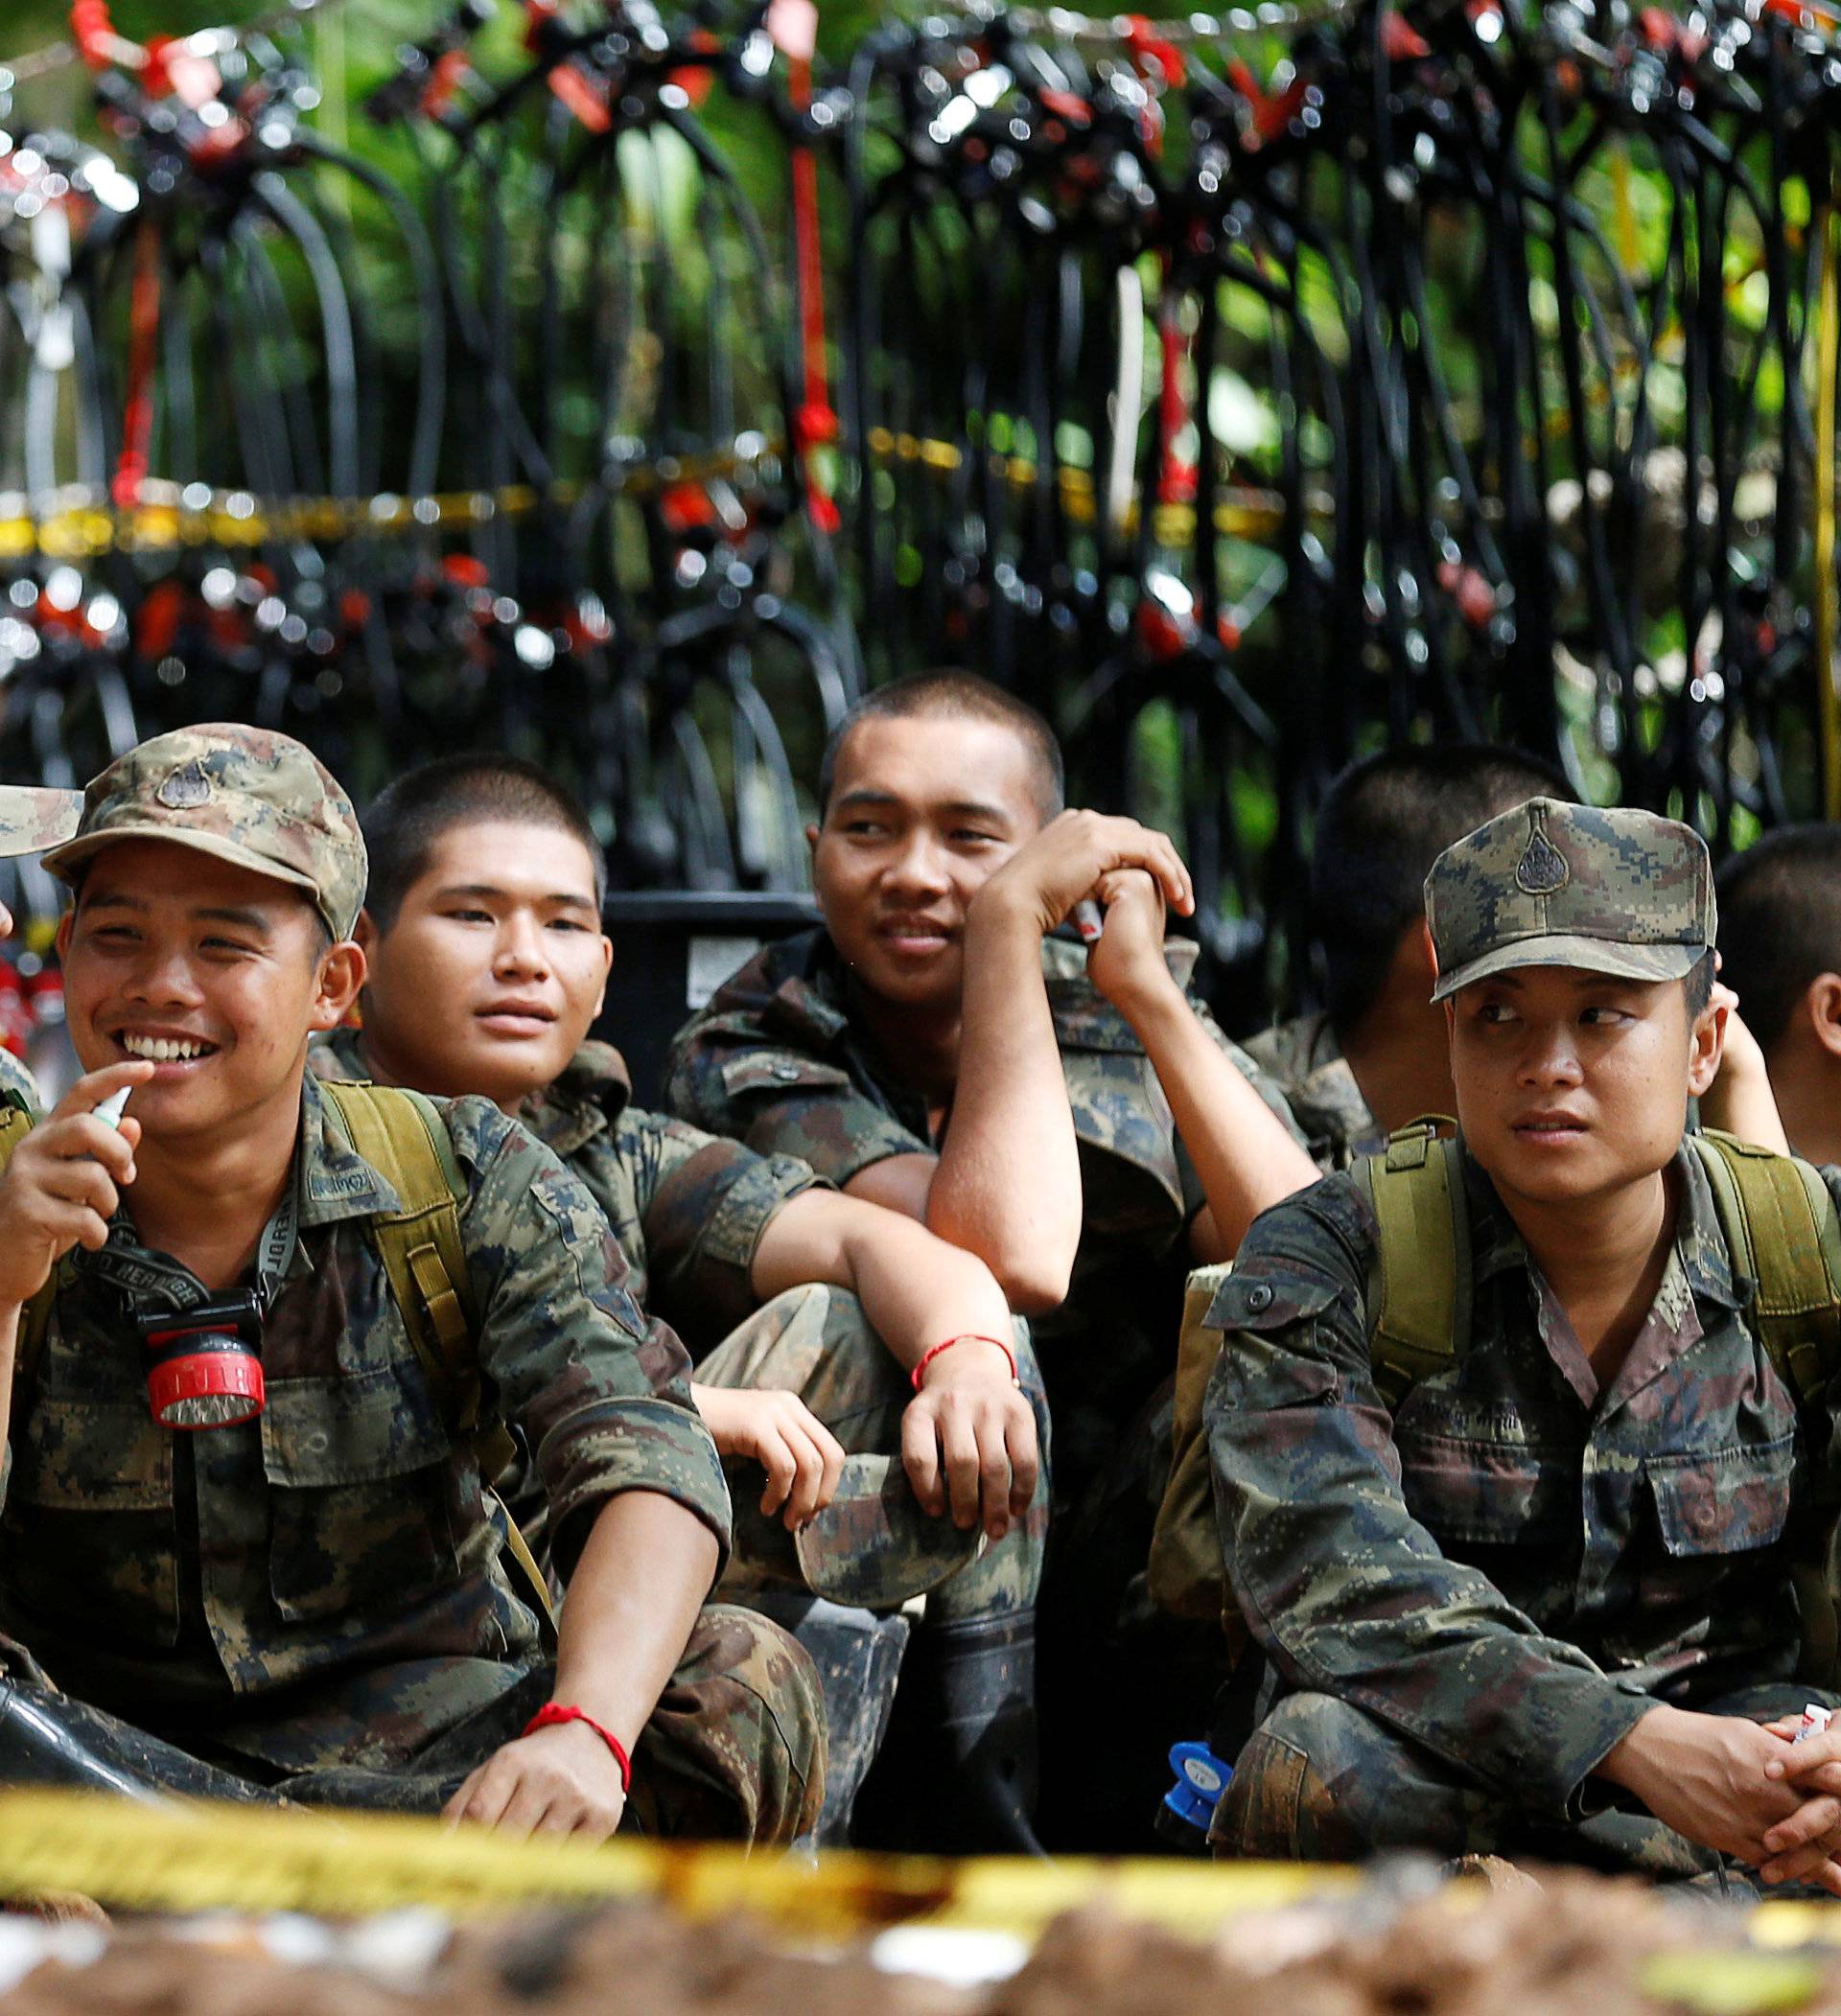 Police and rescue workers pass their time near the Tham Luang cave complex, as members of an under-16 soccer team and their coach have been found alive according to local media in the northern province of Chiang Rai